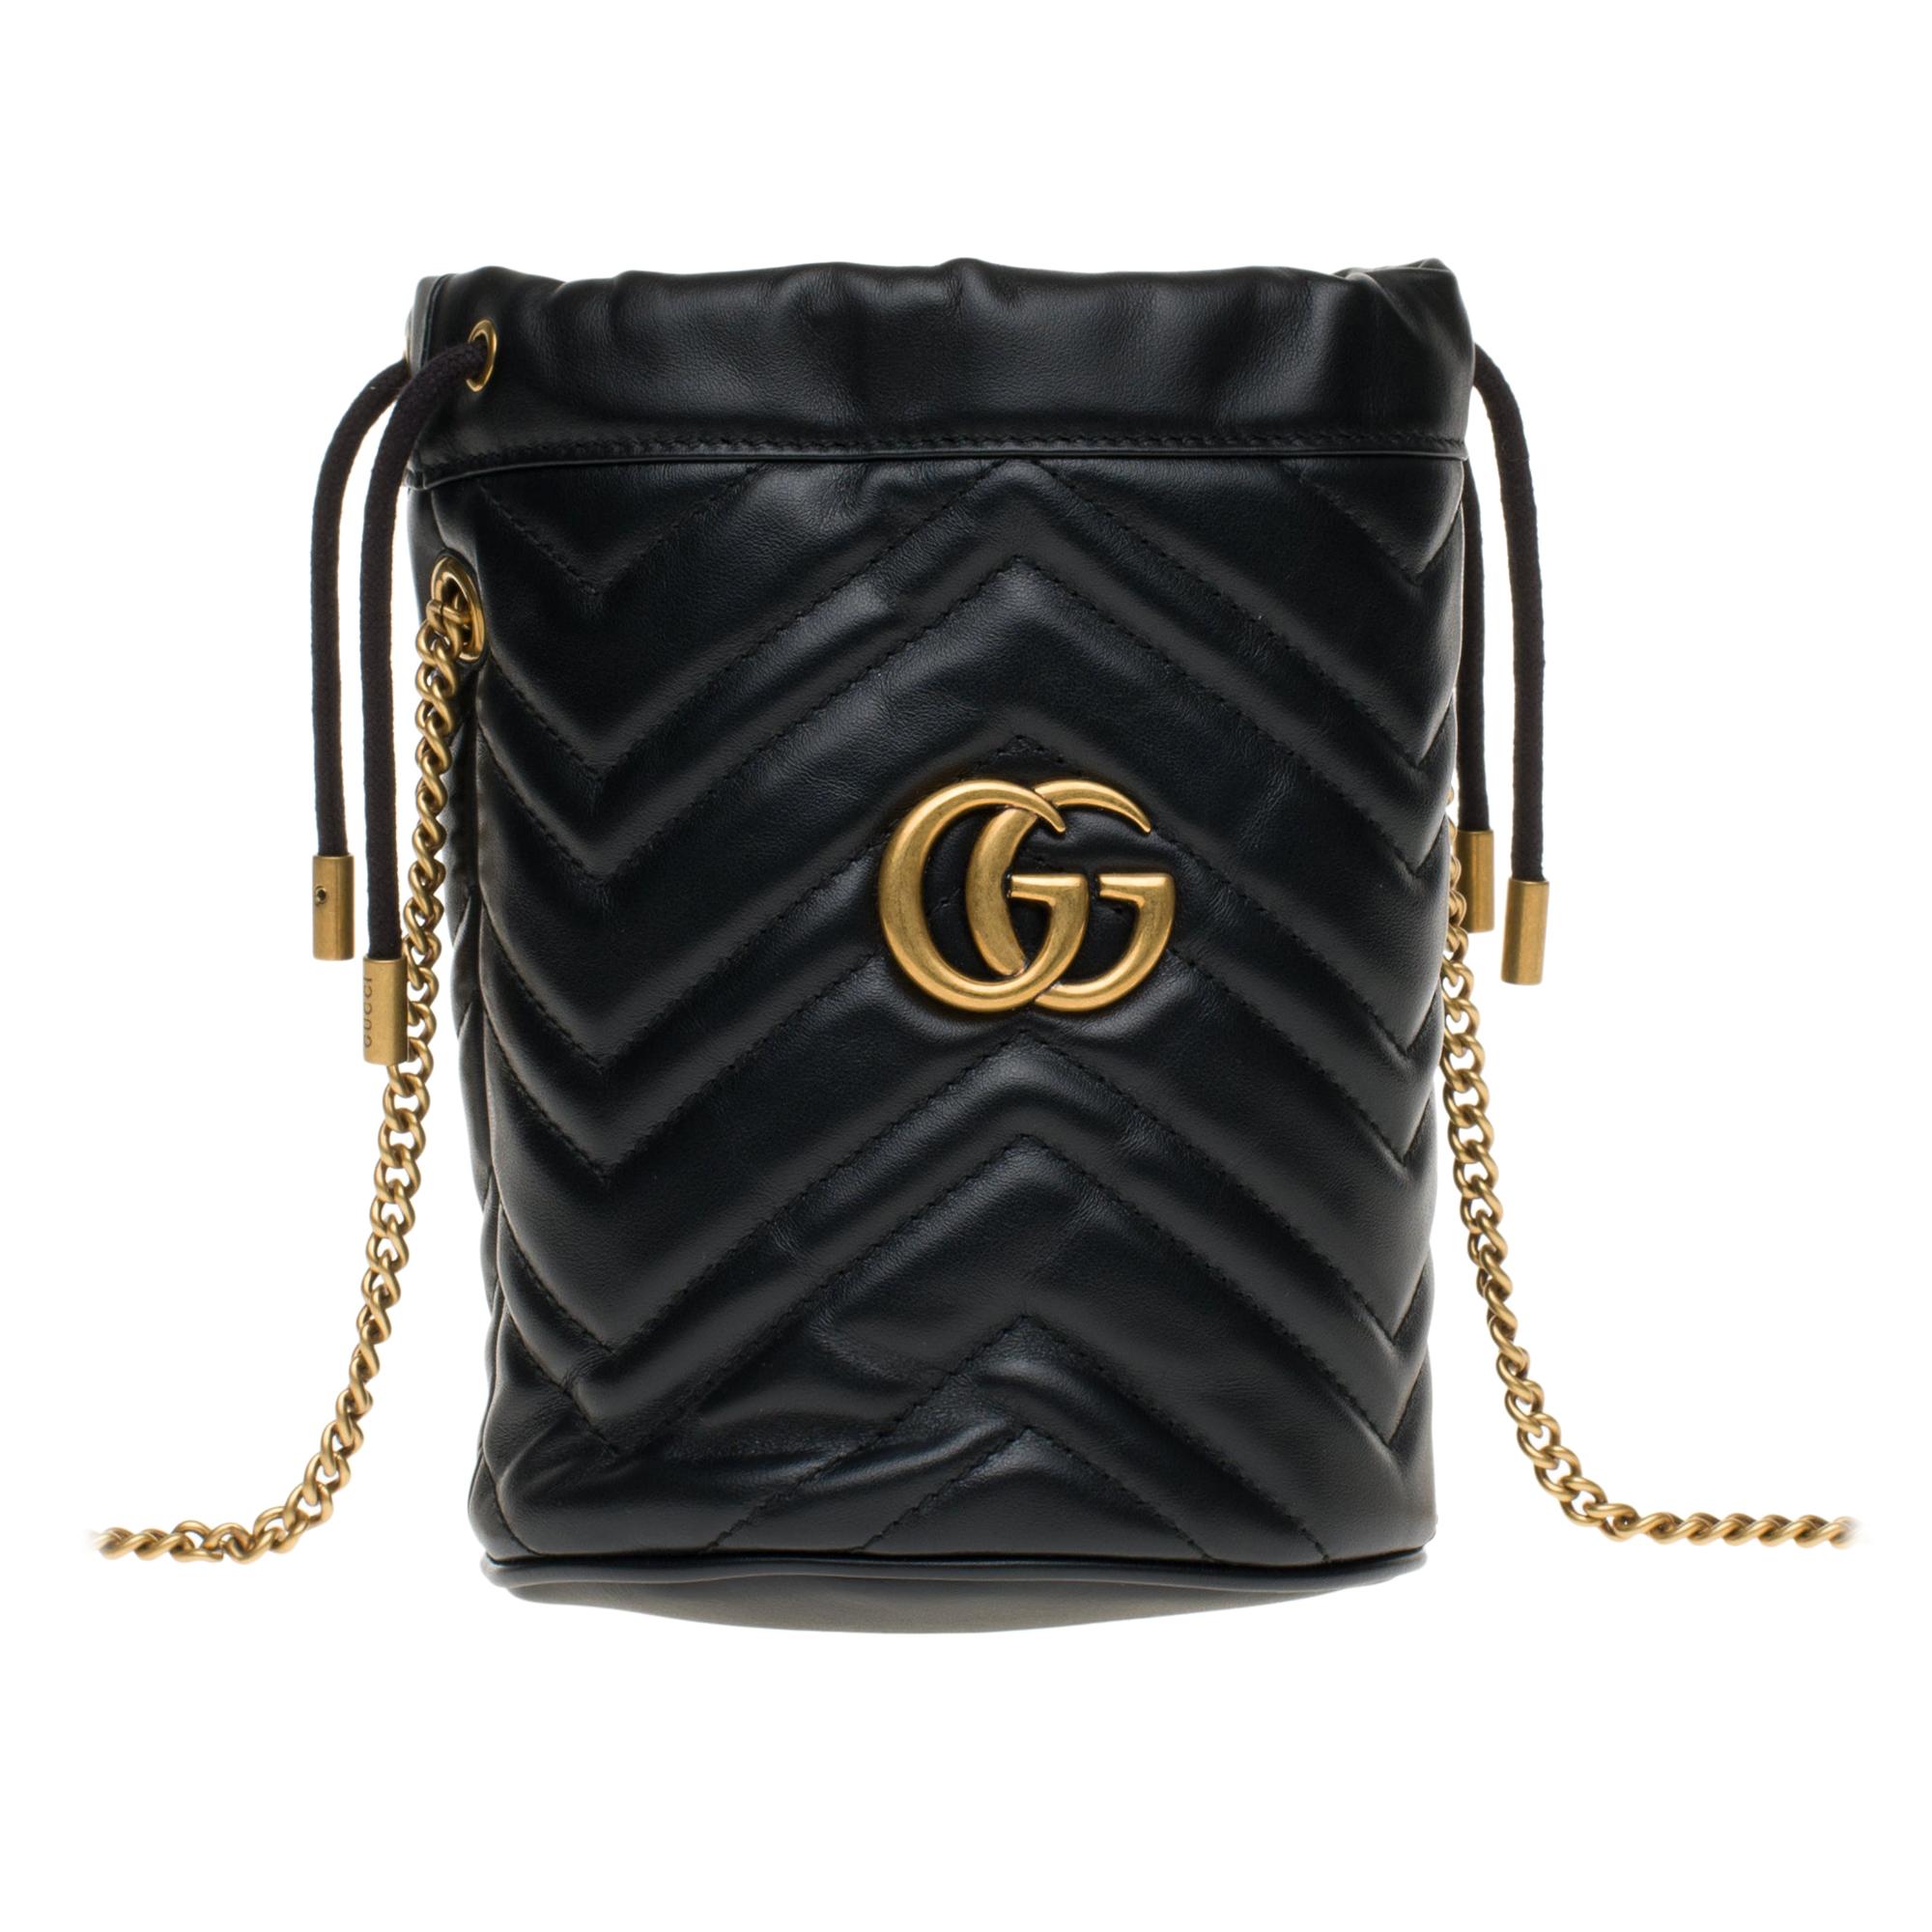 New GUCCI mini bucket bag GG Marmont in black quilted leather with chevrons